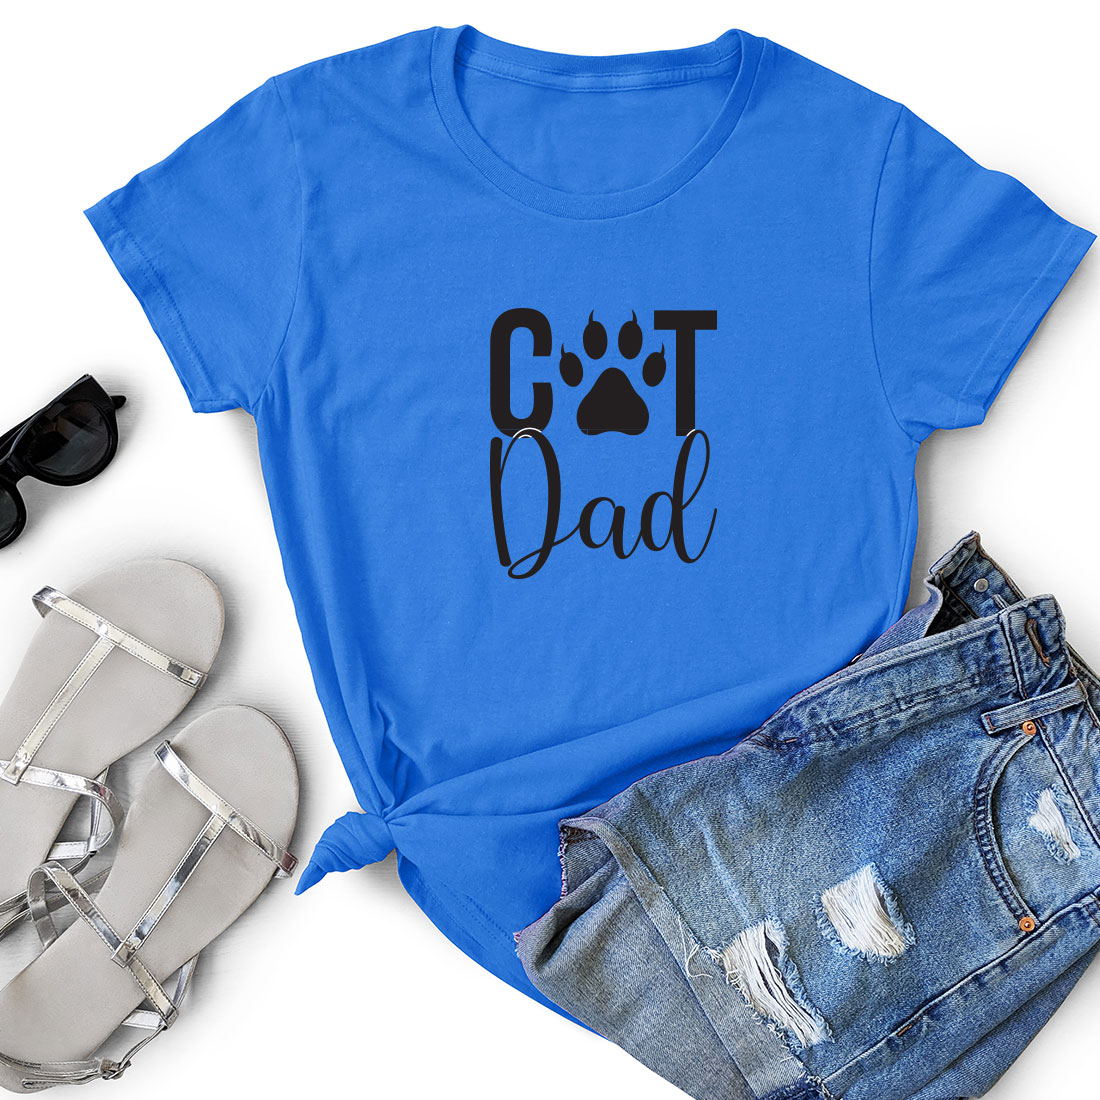 T - shirt that says got dad with a dog paw on it.